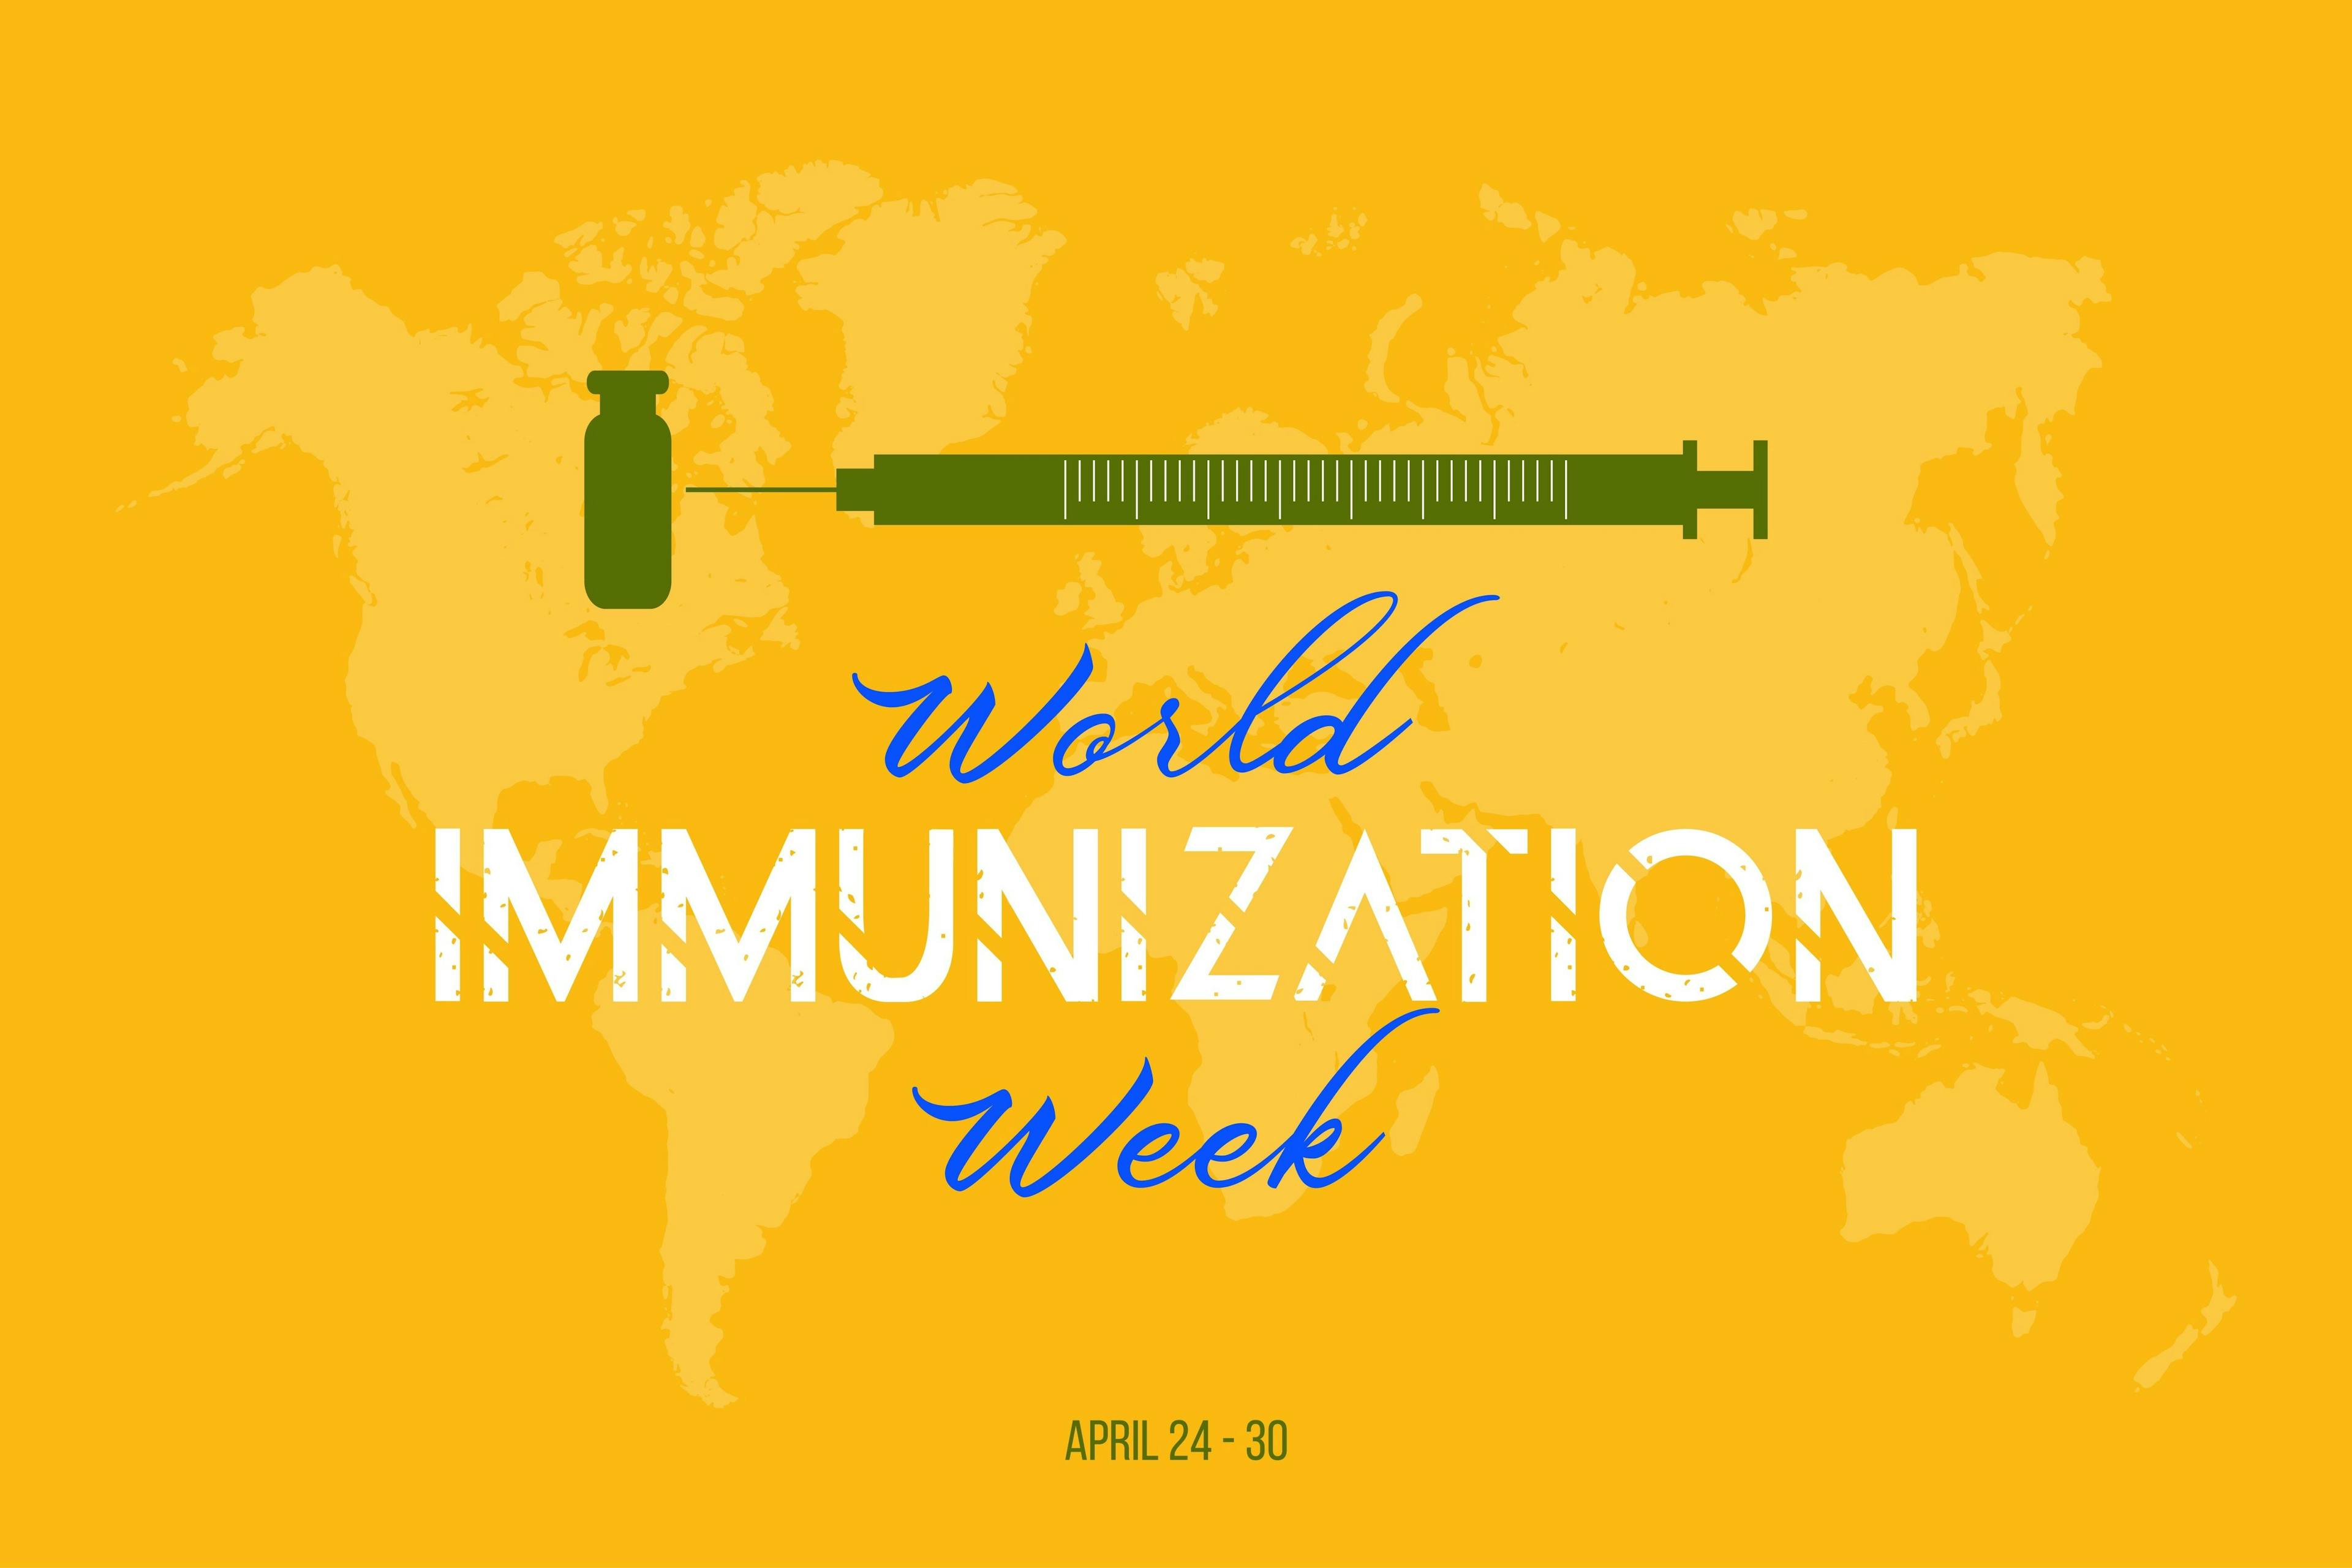 The last week in April is World Immunization Week, and we're recapping the most recent and significant developments in infectious disease vaccines.